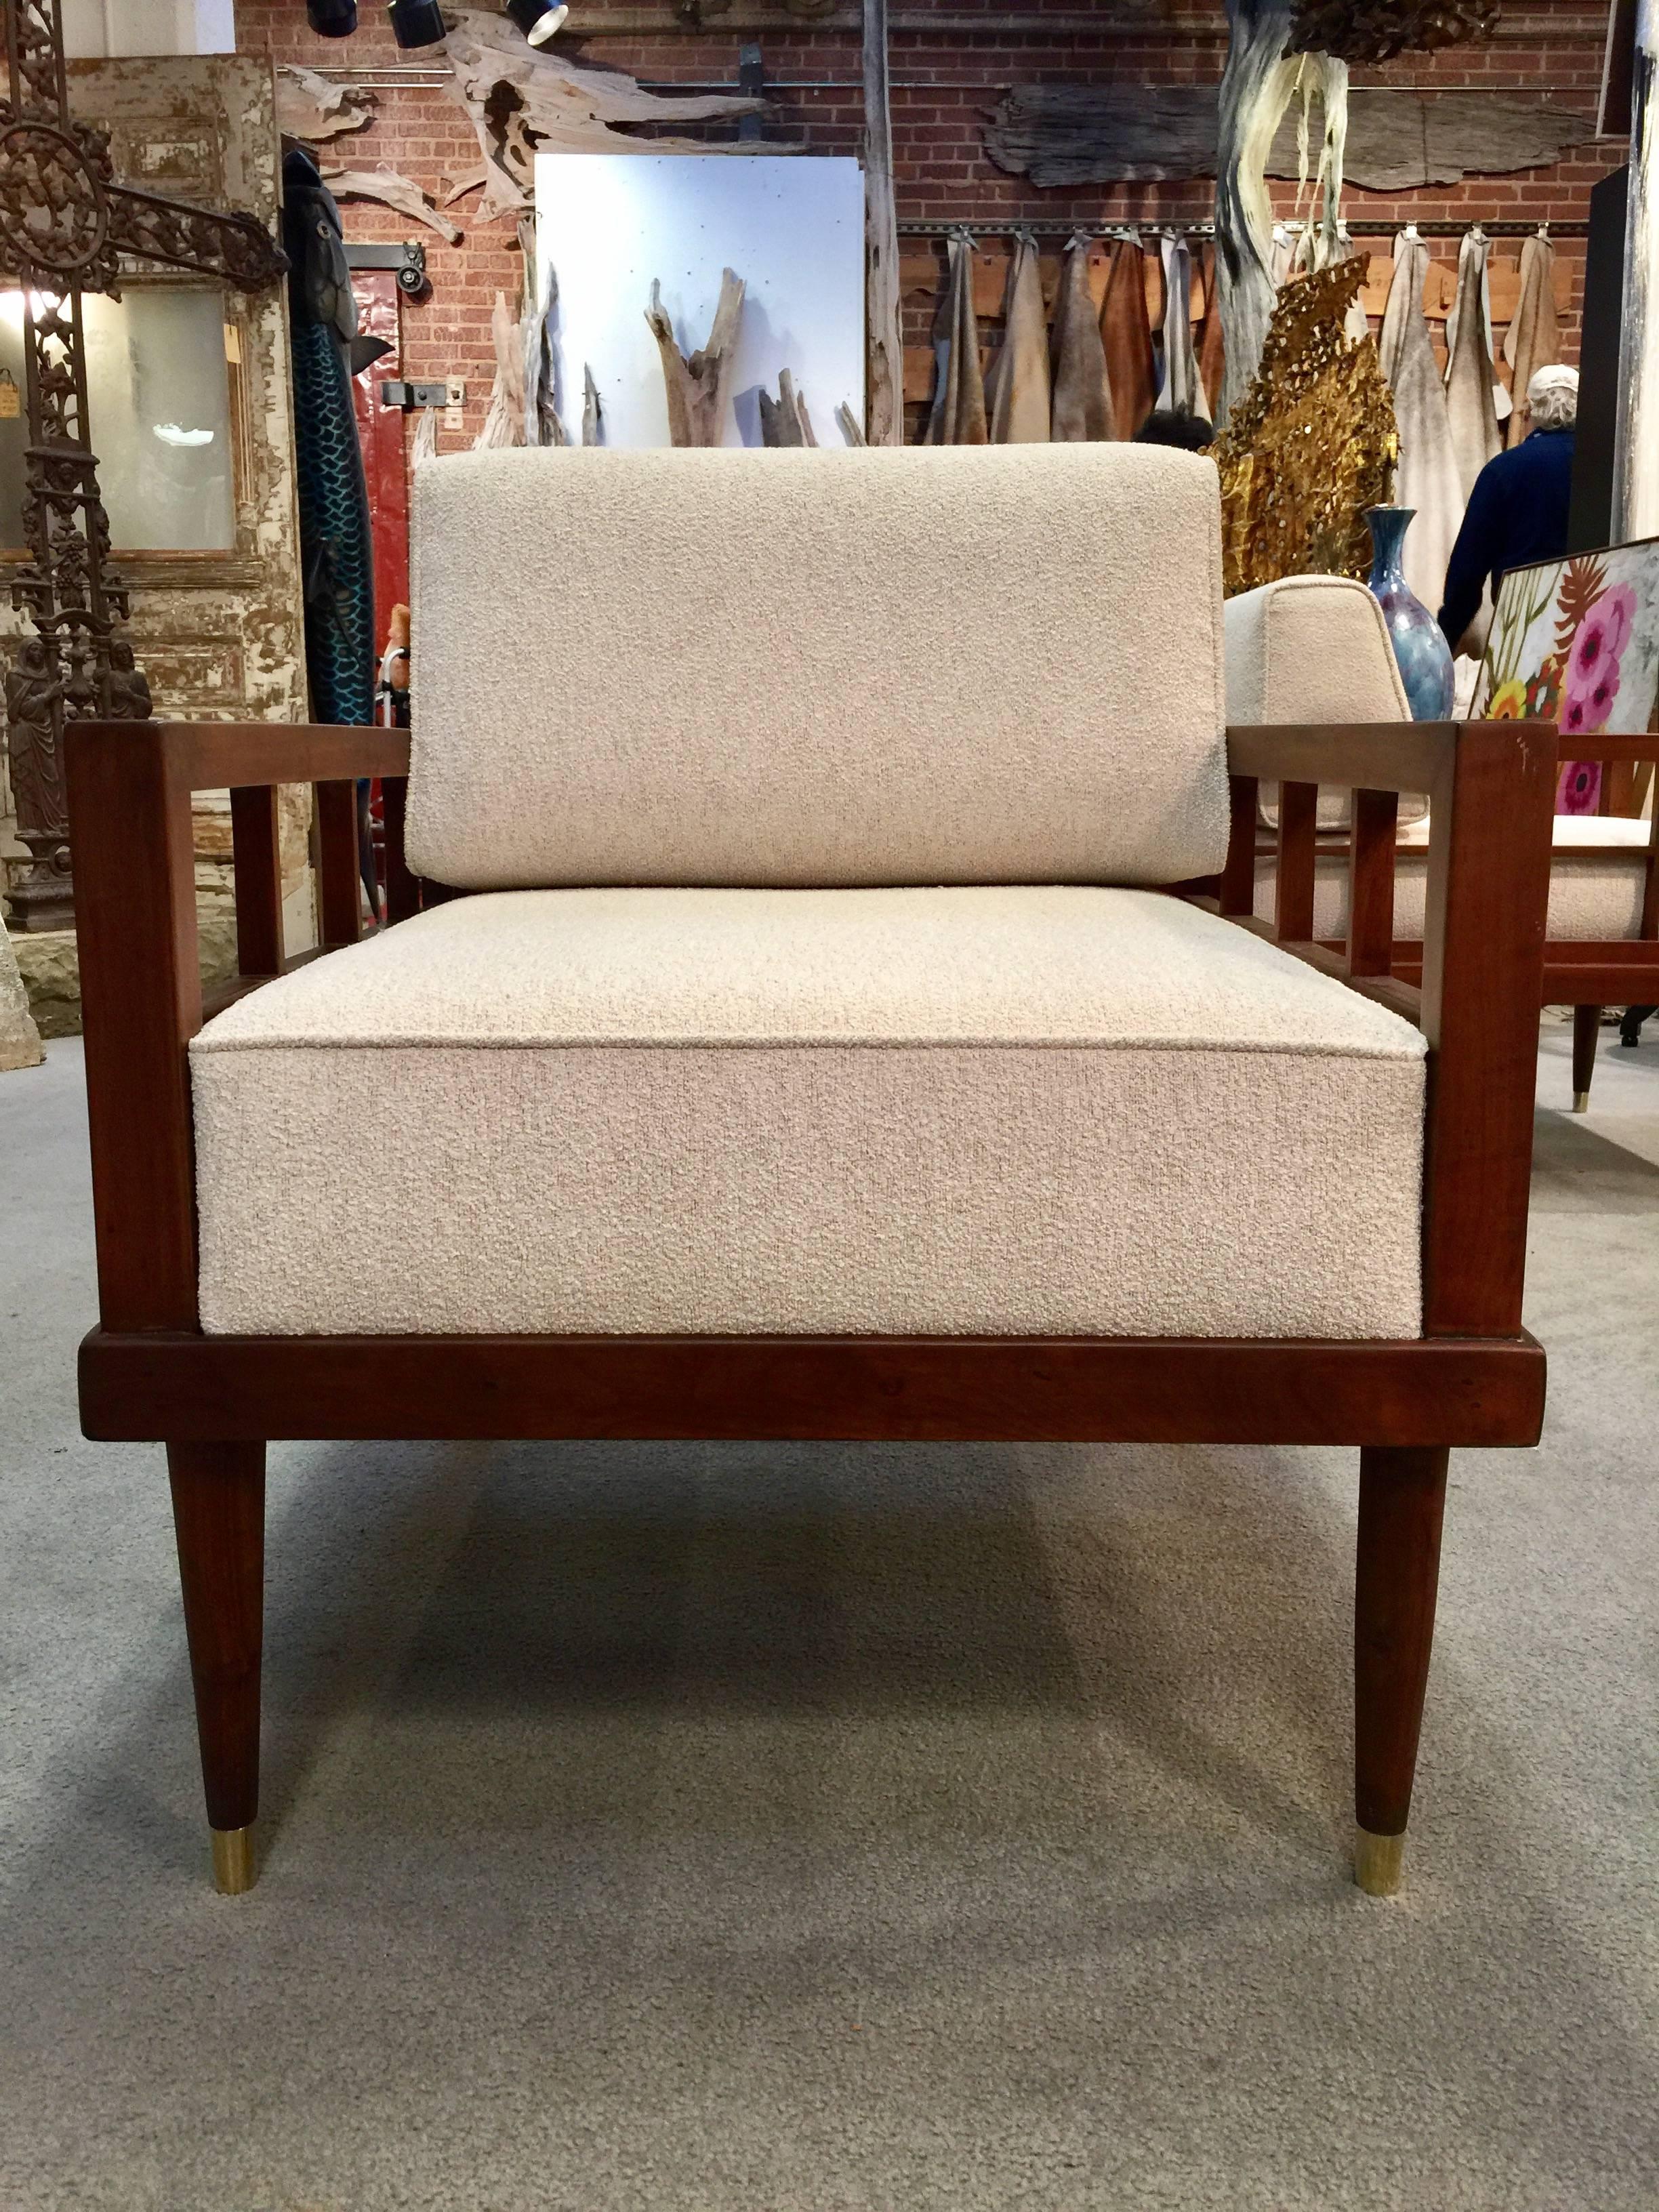 A pair of Frank Lloyd Wright inspired armchairs.
Beautifully designed armchairs having a strong architectural design. 
Simple yet elegant.
 